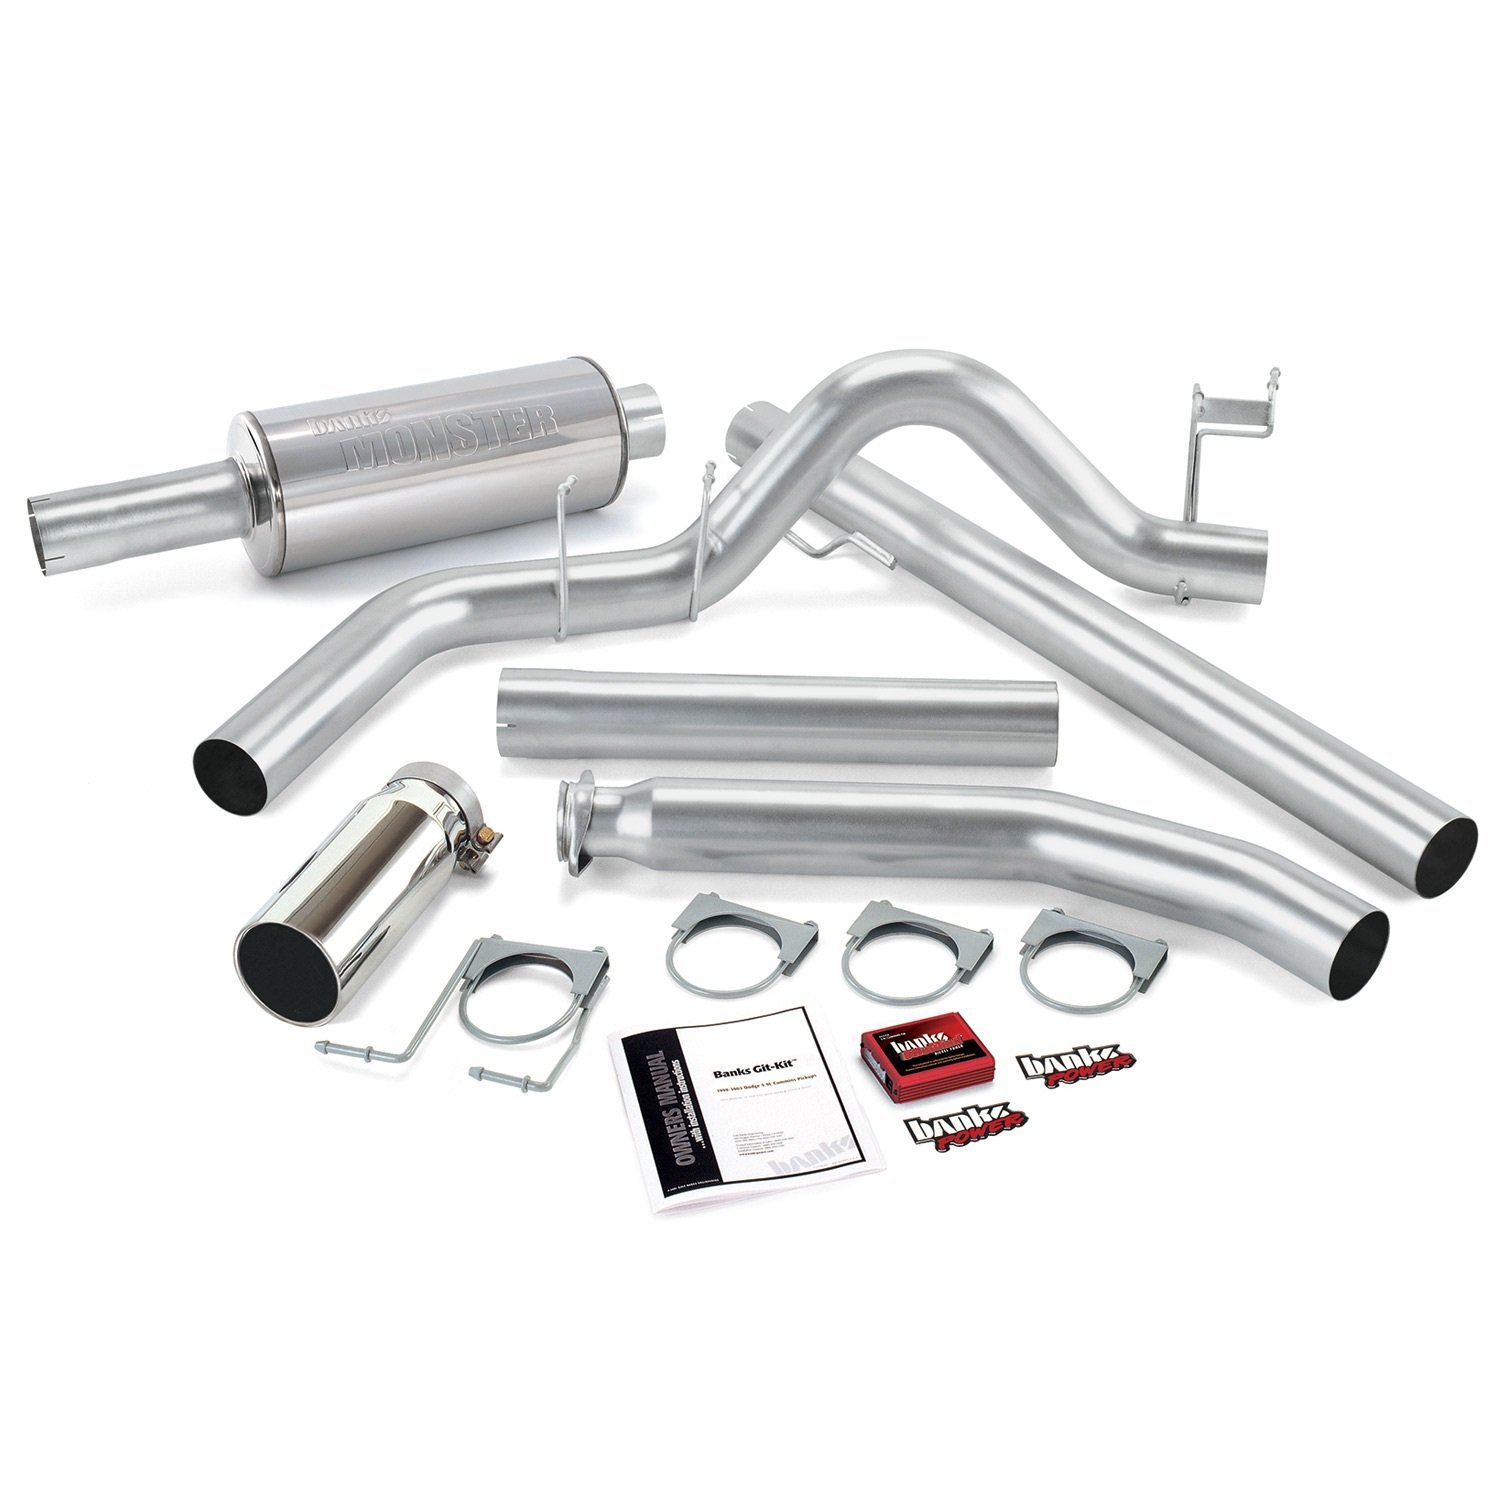 Banks Power 49358 Single Exhaust Git-Kit for 98-00 Dodge 5.9L - Click Image to Close